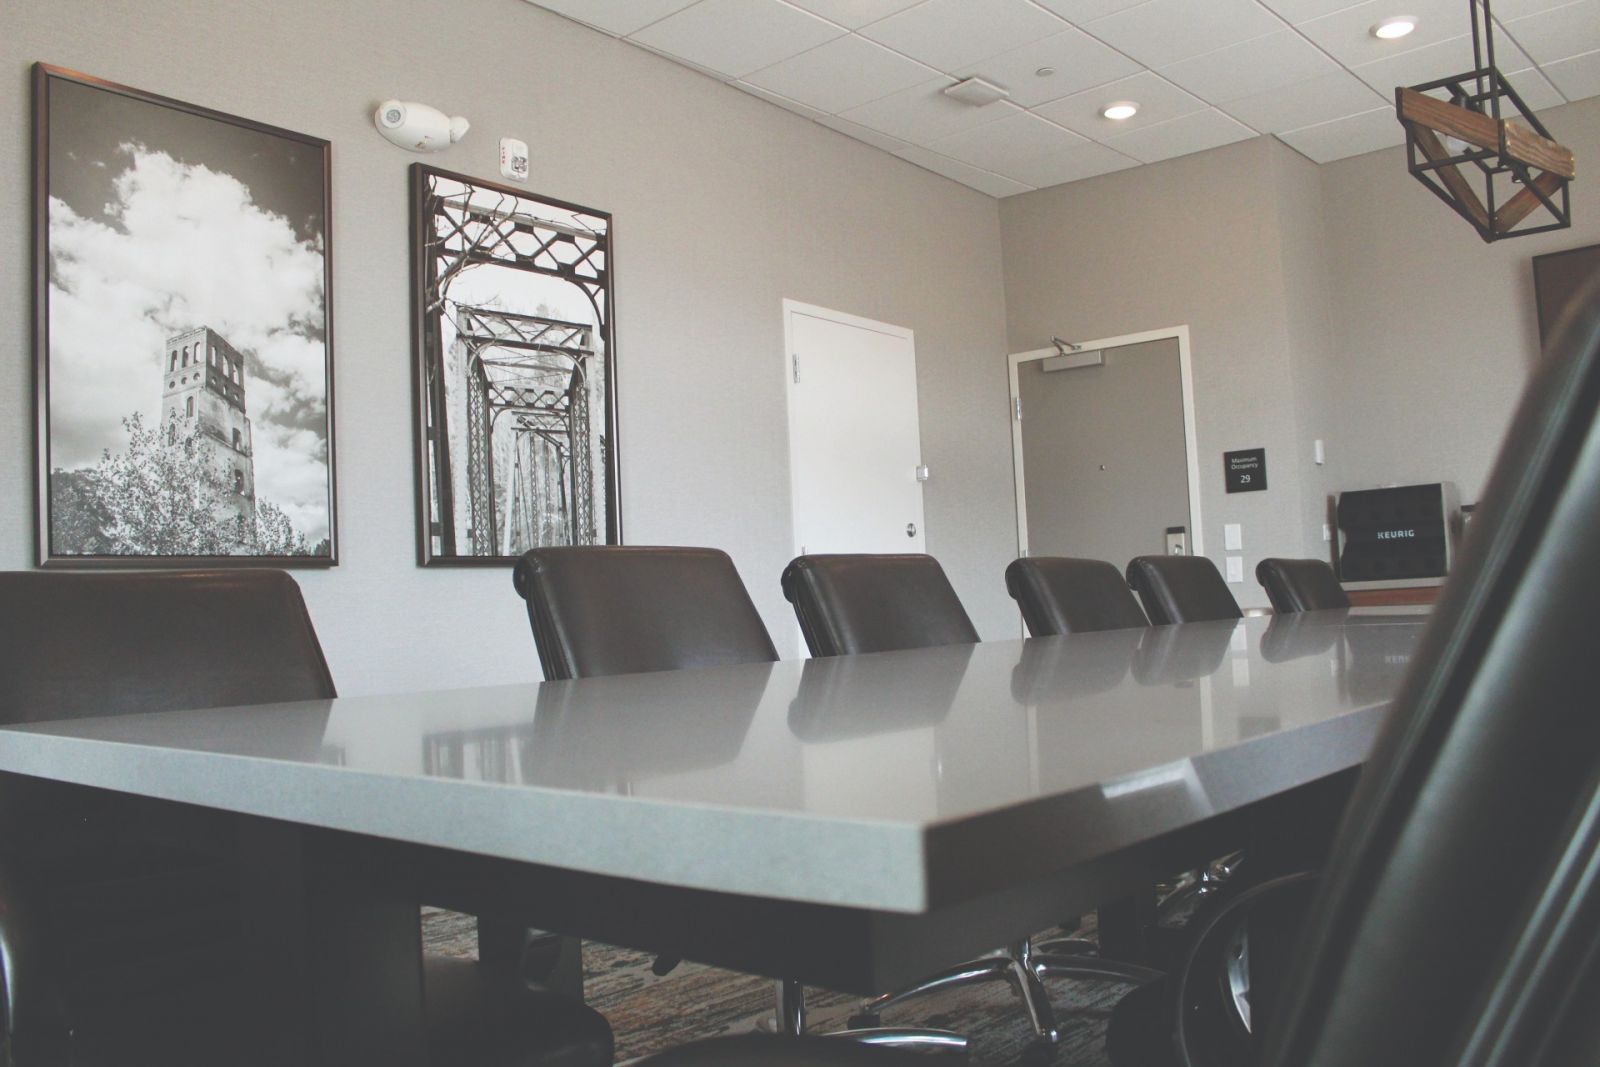 The hotel has a conference room available for lease to local businesses. (Photo/Provided)